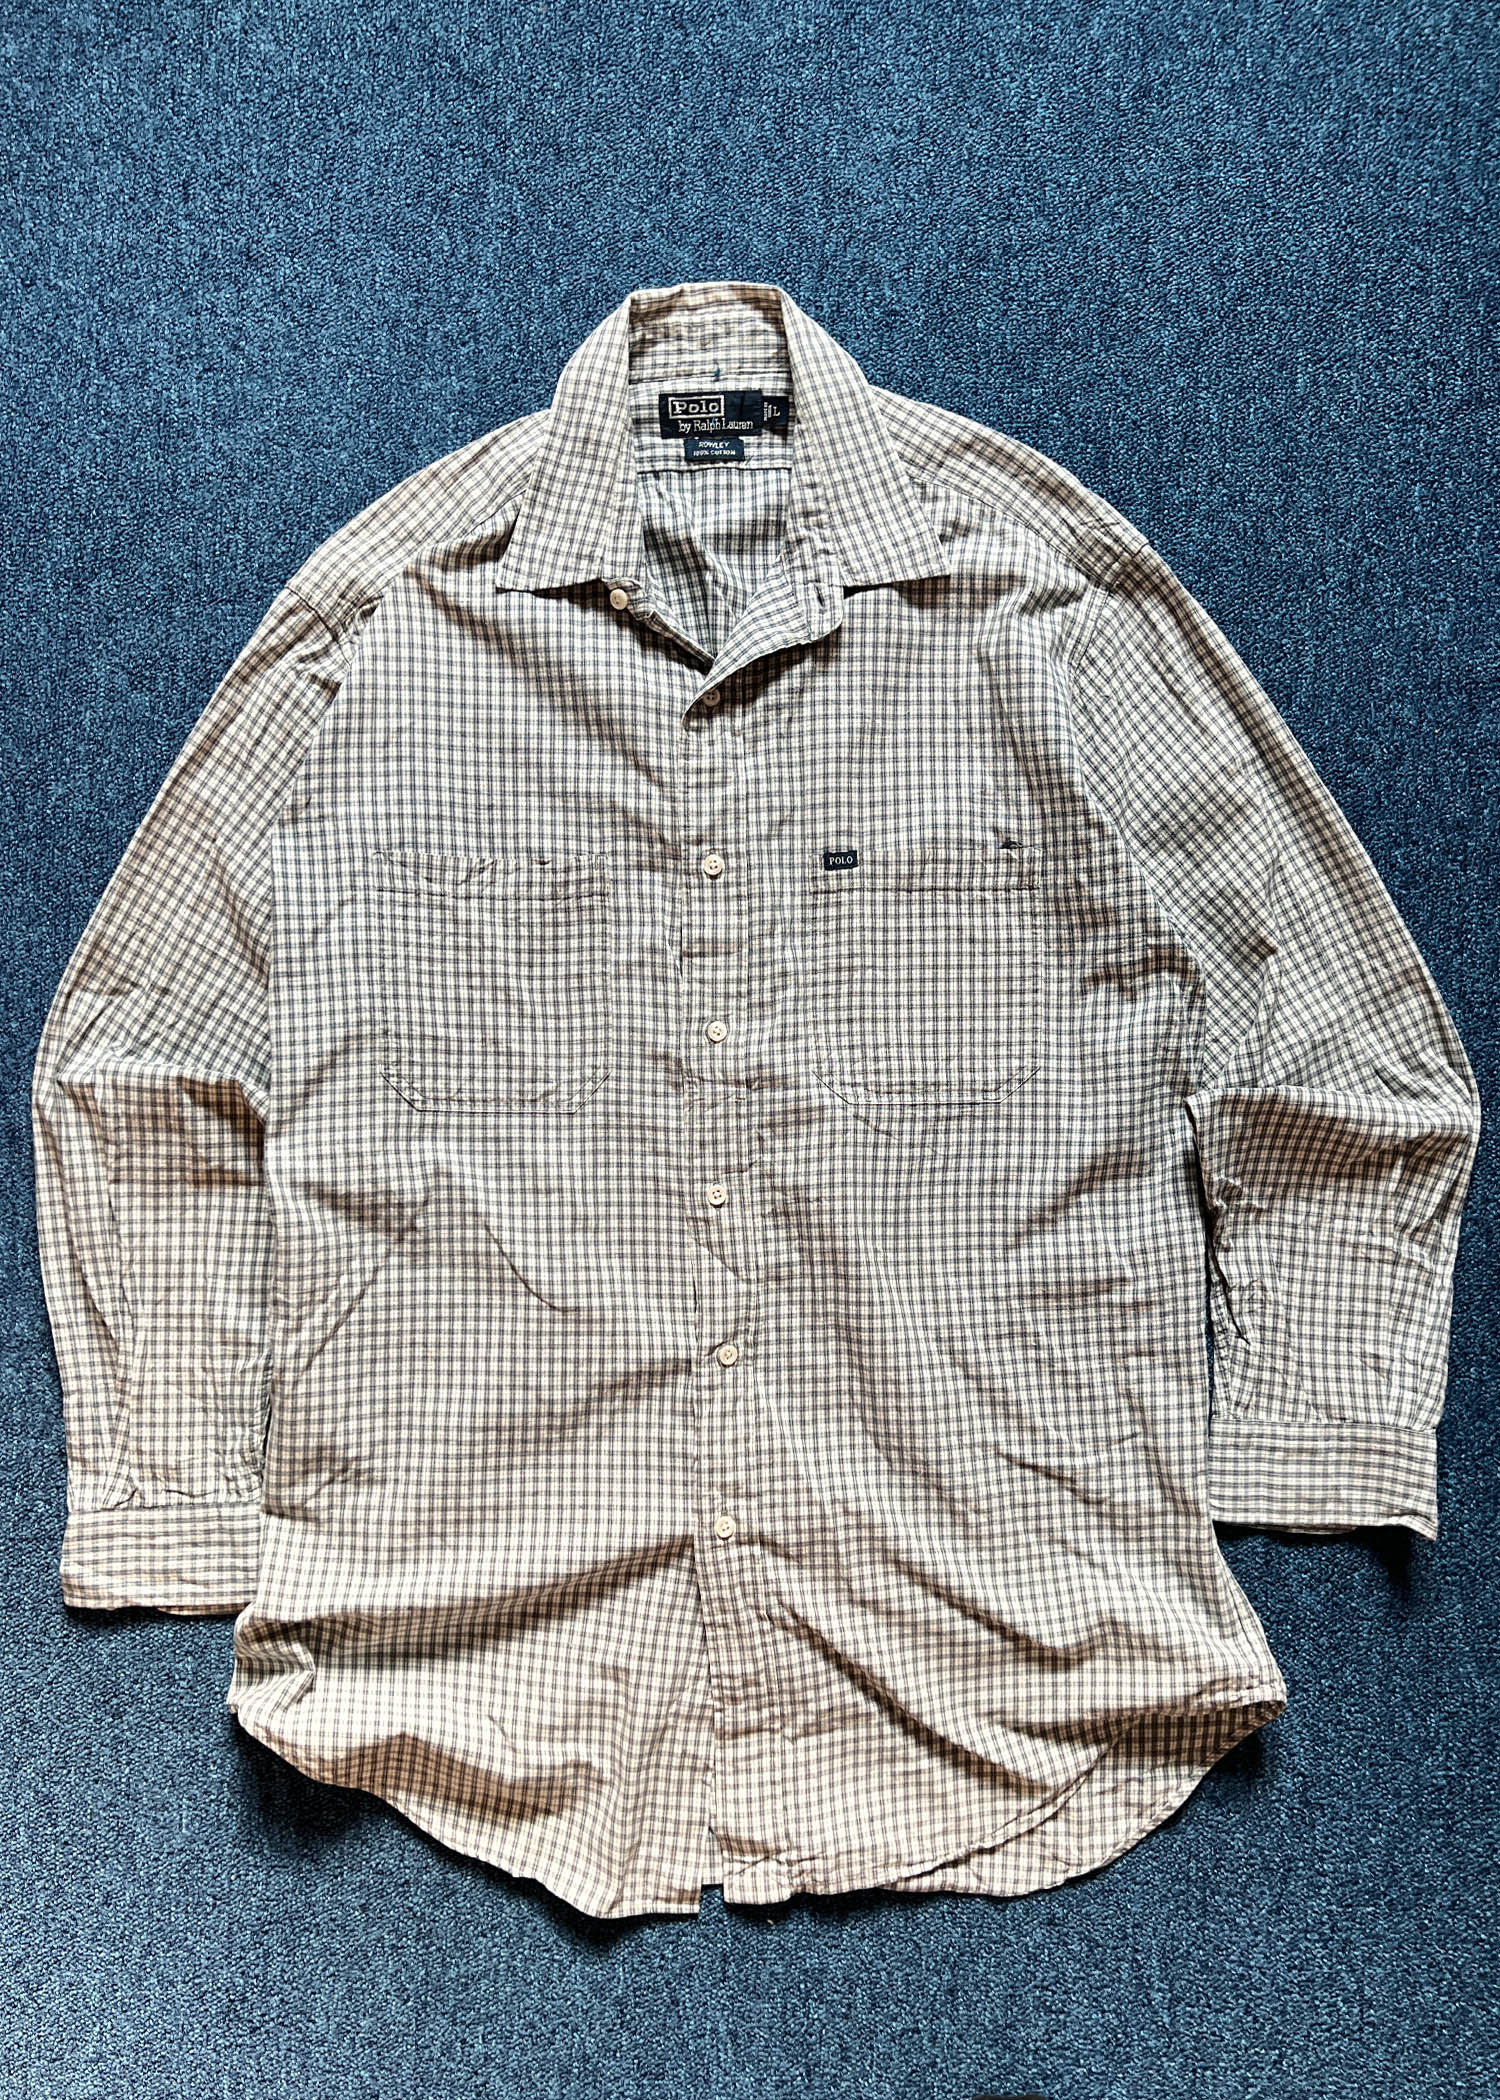 Polo by Ralph Lauren ROWLEY check shirts